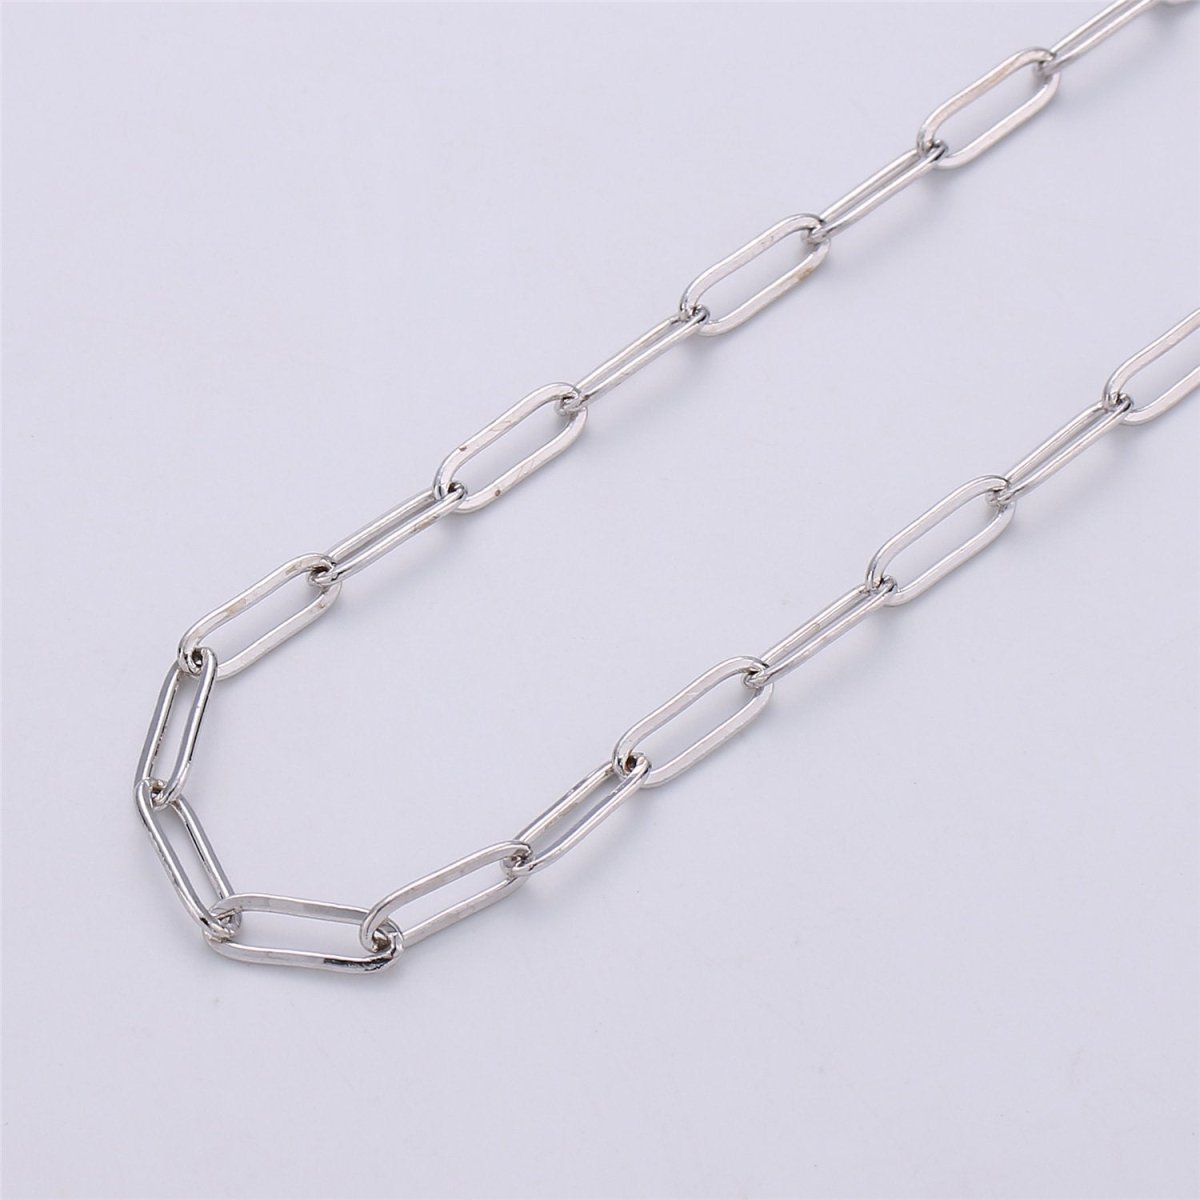 4X11mm 24K Gold Filled PAPERCLIP Elongated Chain, Flat Drawn Rectangle Cable Box Chain Sold By Yard, Bulk Unfinished Chain, White Gold Filled | ROLL-072, ROLL-077, ROLL-179, ROLL-095 Clearance Pricing - DLUXCA